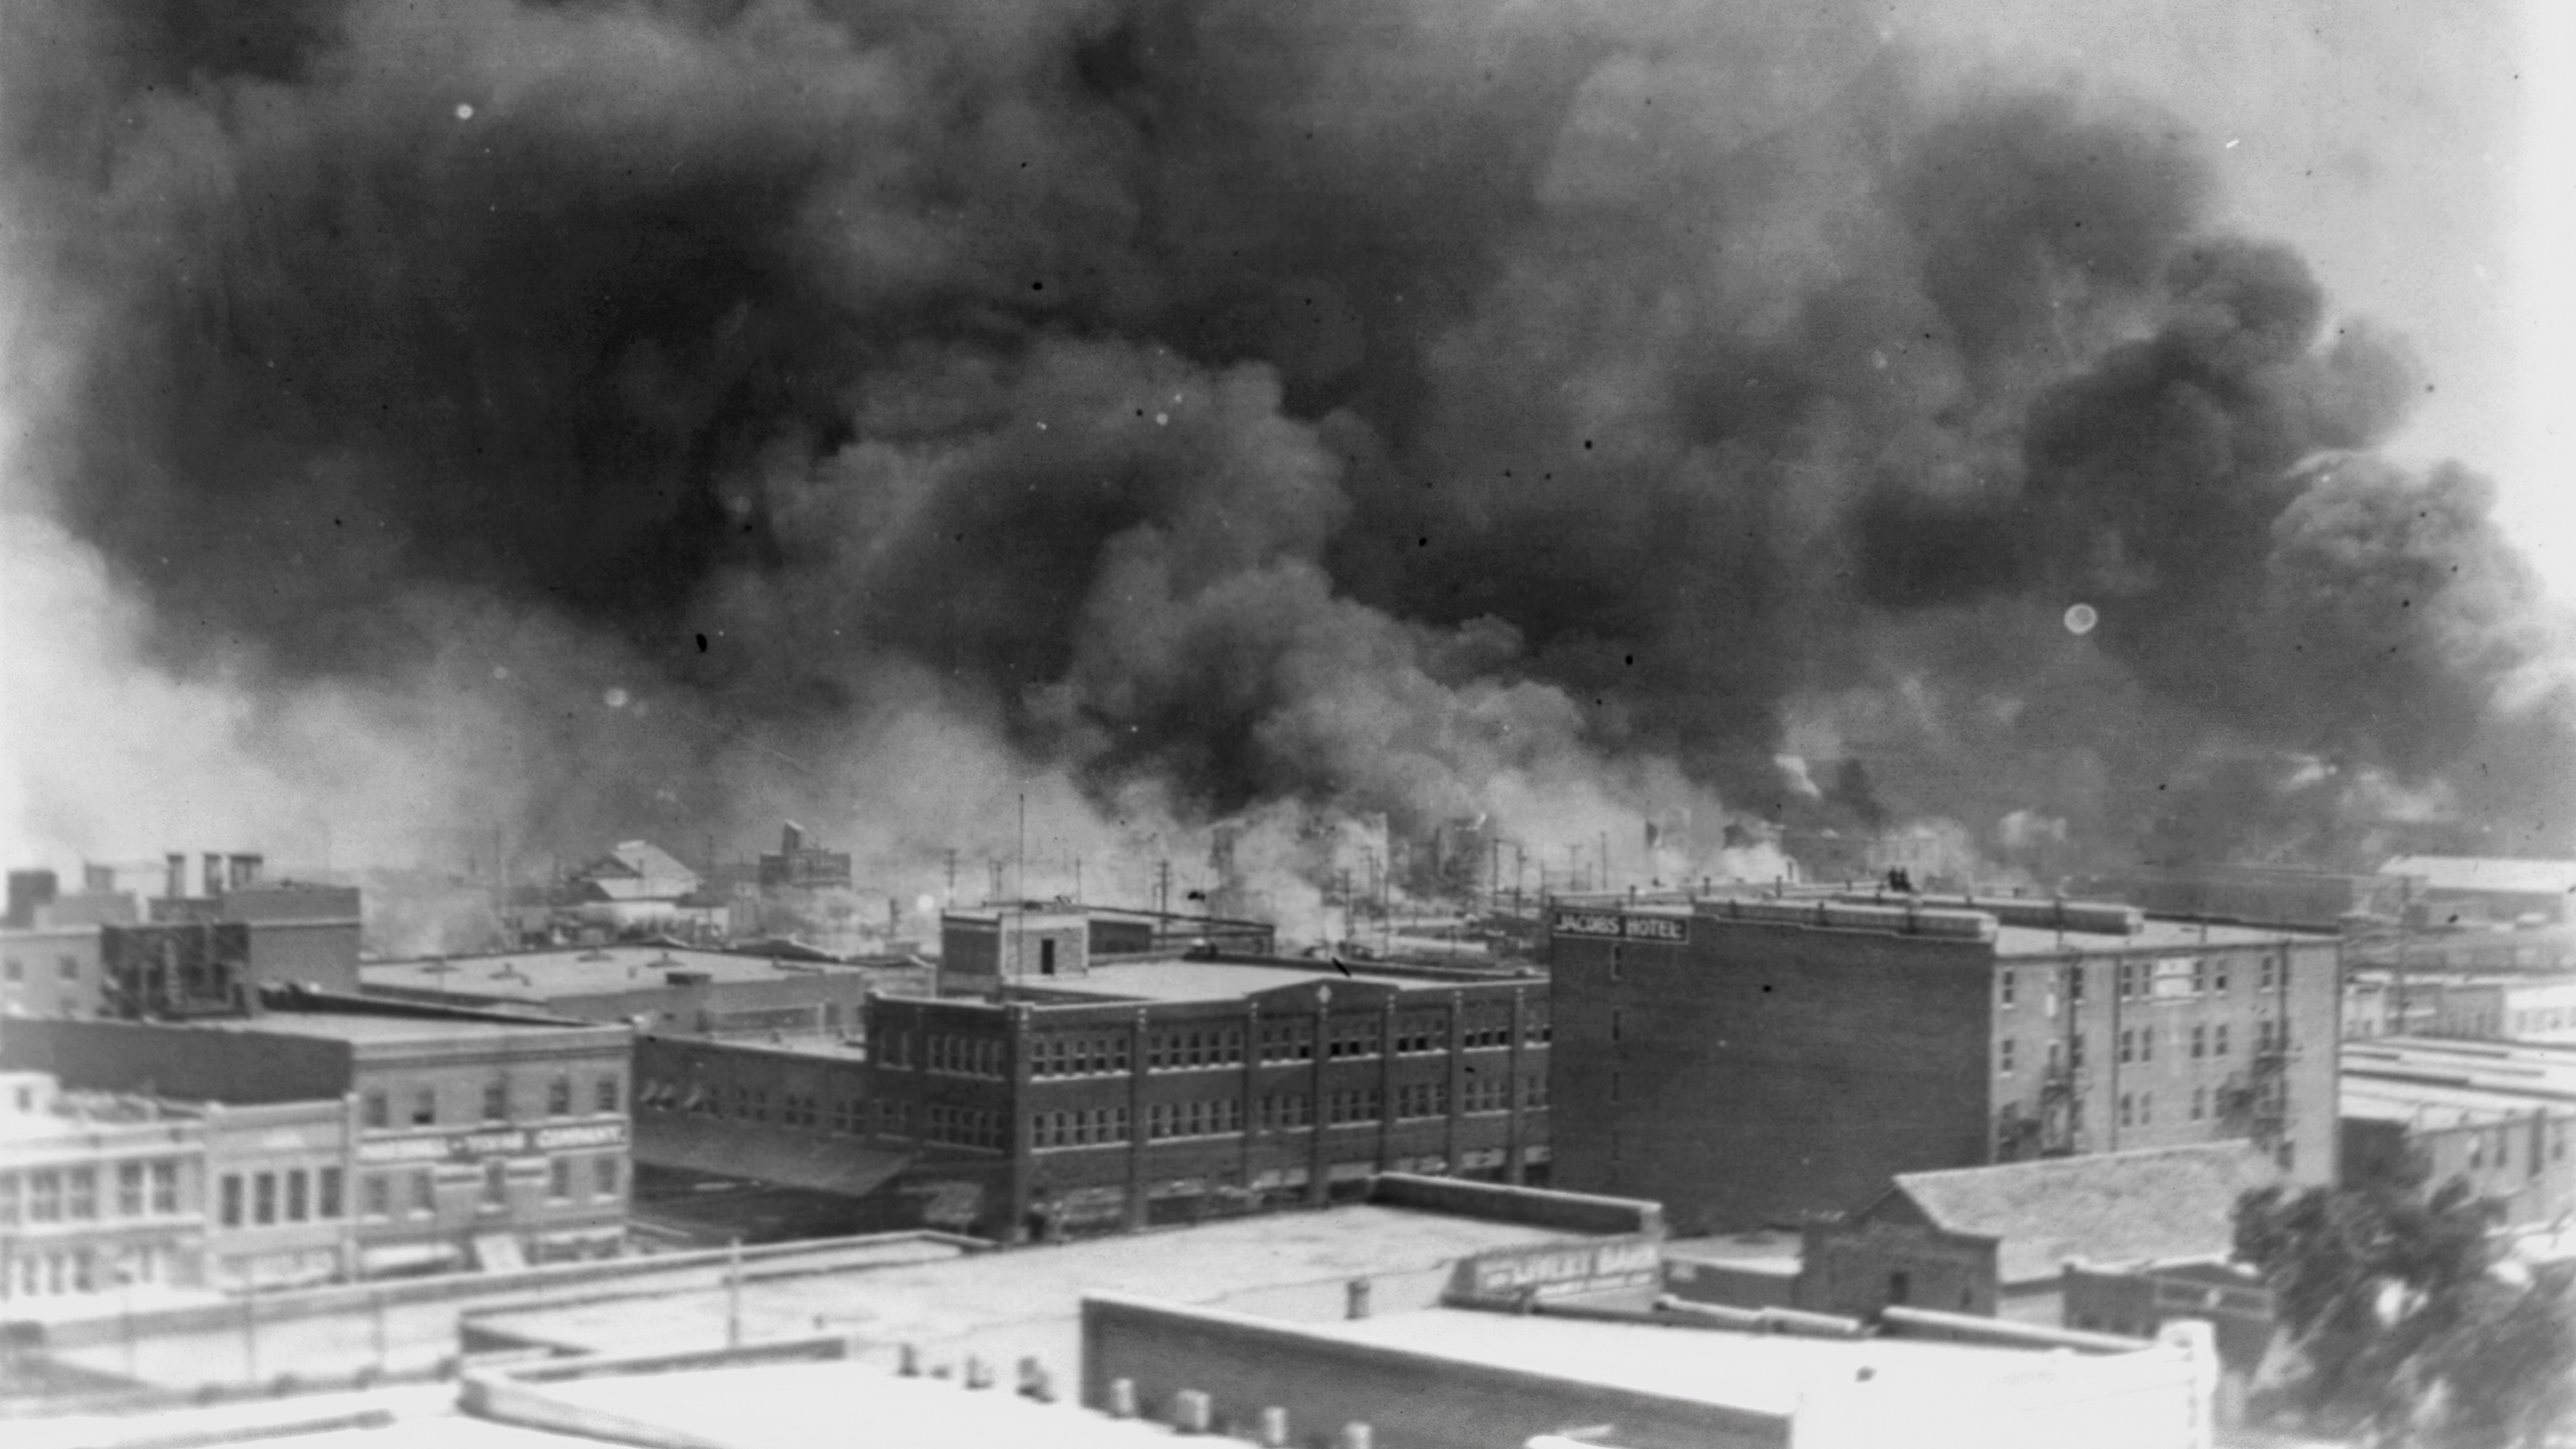 In this 1921 image provided by the Library of Congress, smoke billows over Tulsa, Oklahoma.